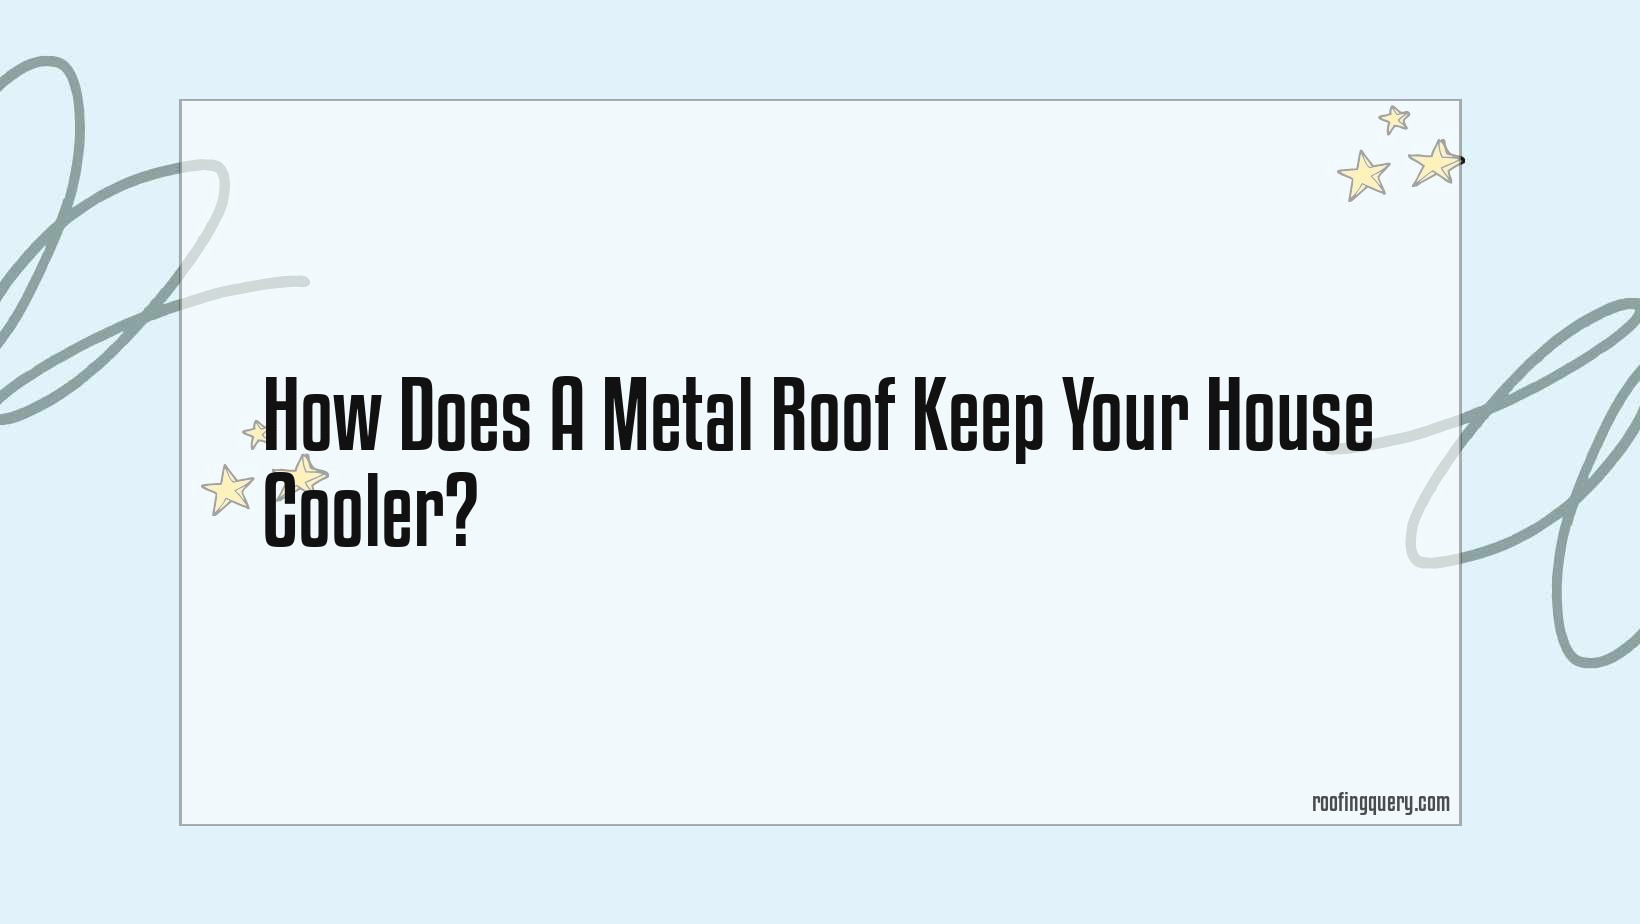 How Does A Metal Roof Keep Your House Cooler?